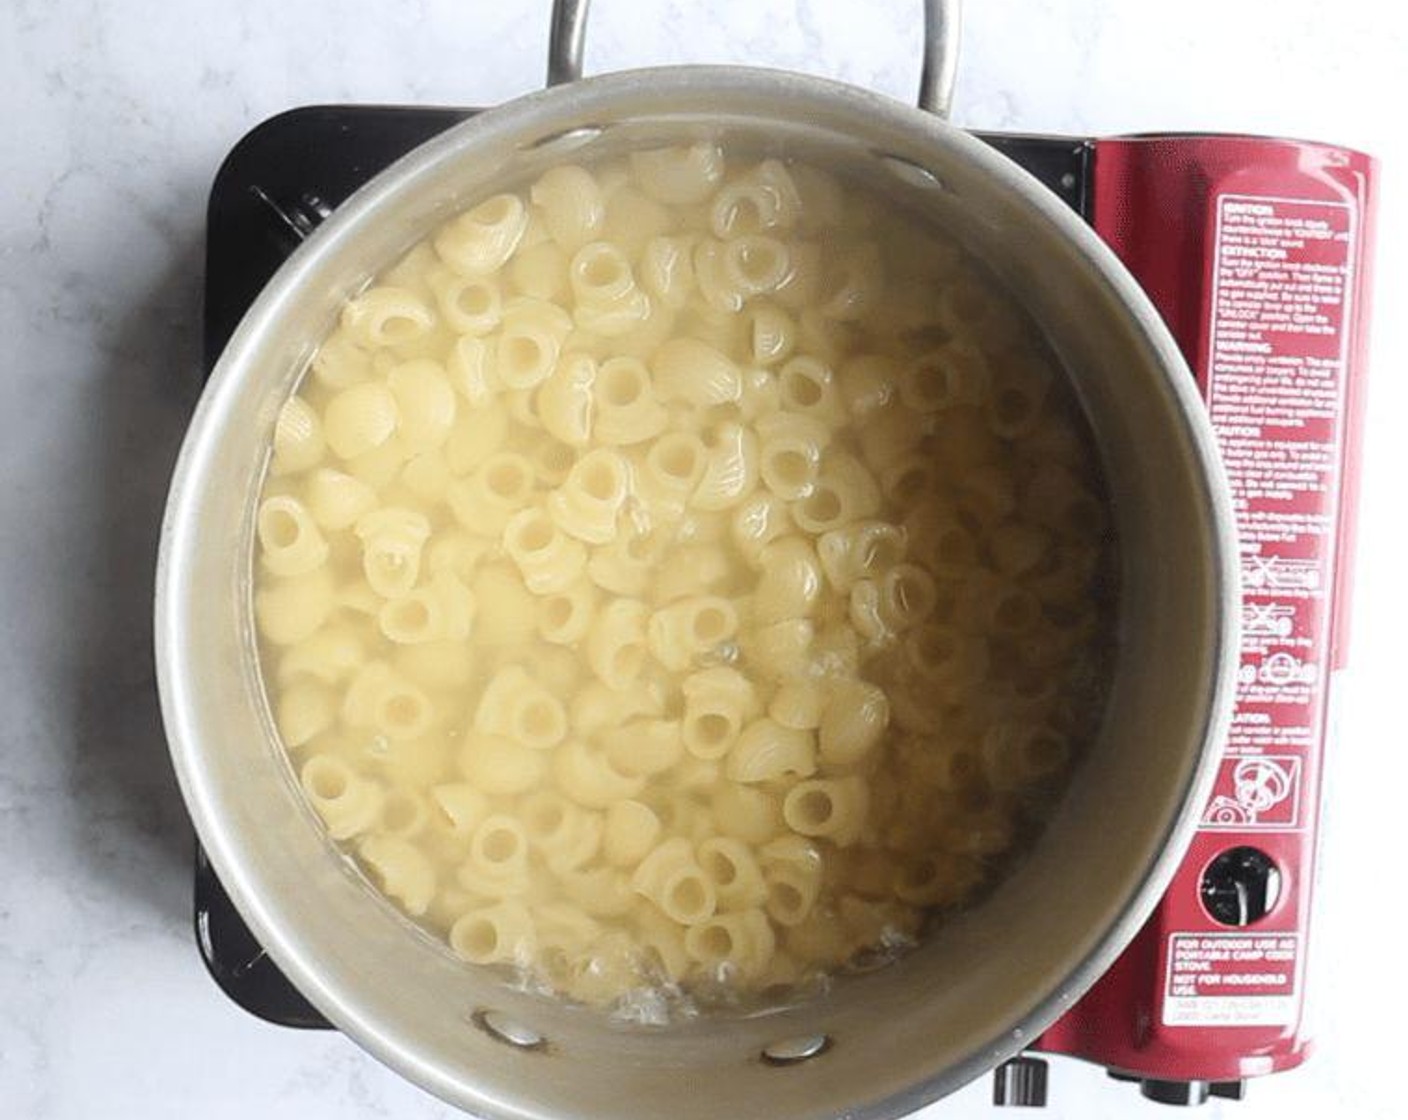 step 1 Bring a large pot of well-salted water to a boil. Cook Pasta (12 oz) until 1 minute shy of al dente, according to the package directions. Drain, reserving 1/2 cup (or more) of pasta water.